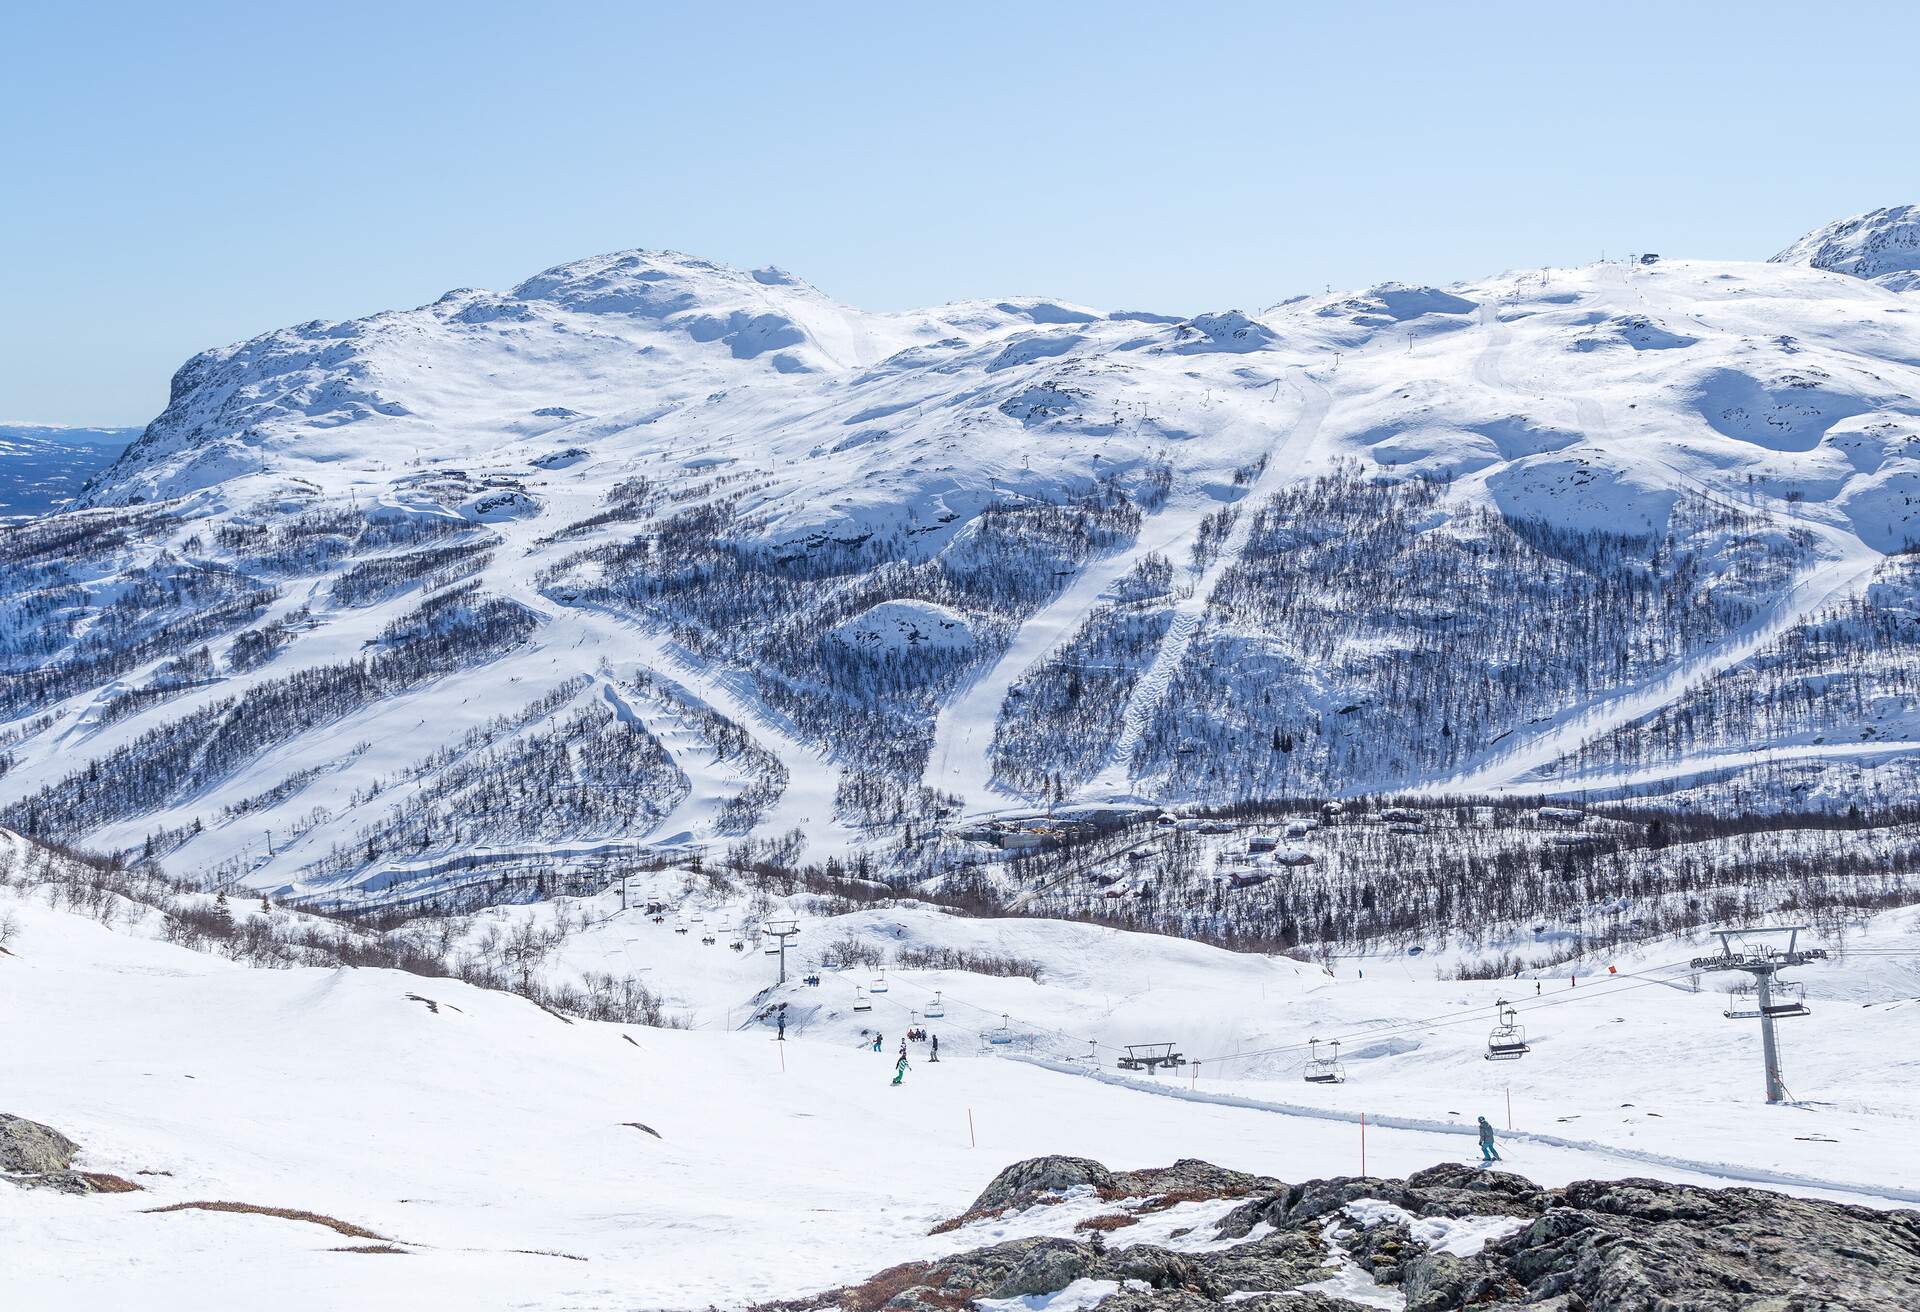 View of Mount Totten and ski slopes in Hemsedal, Norway